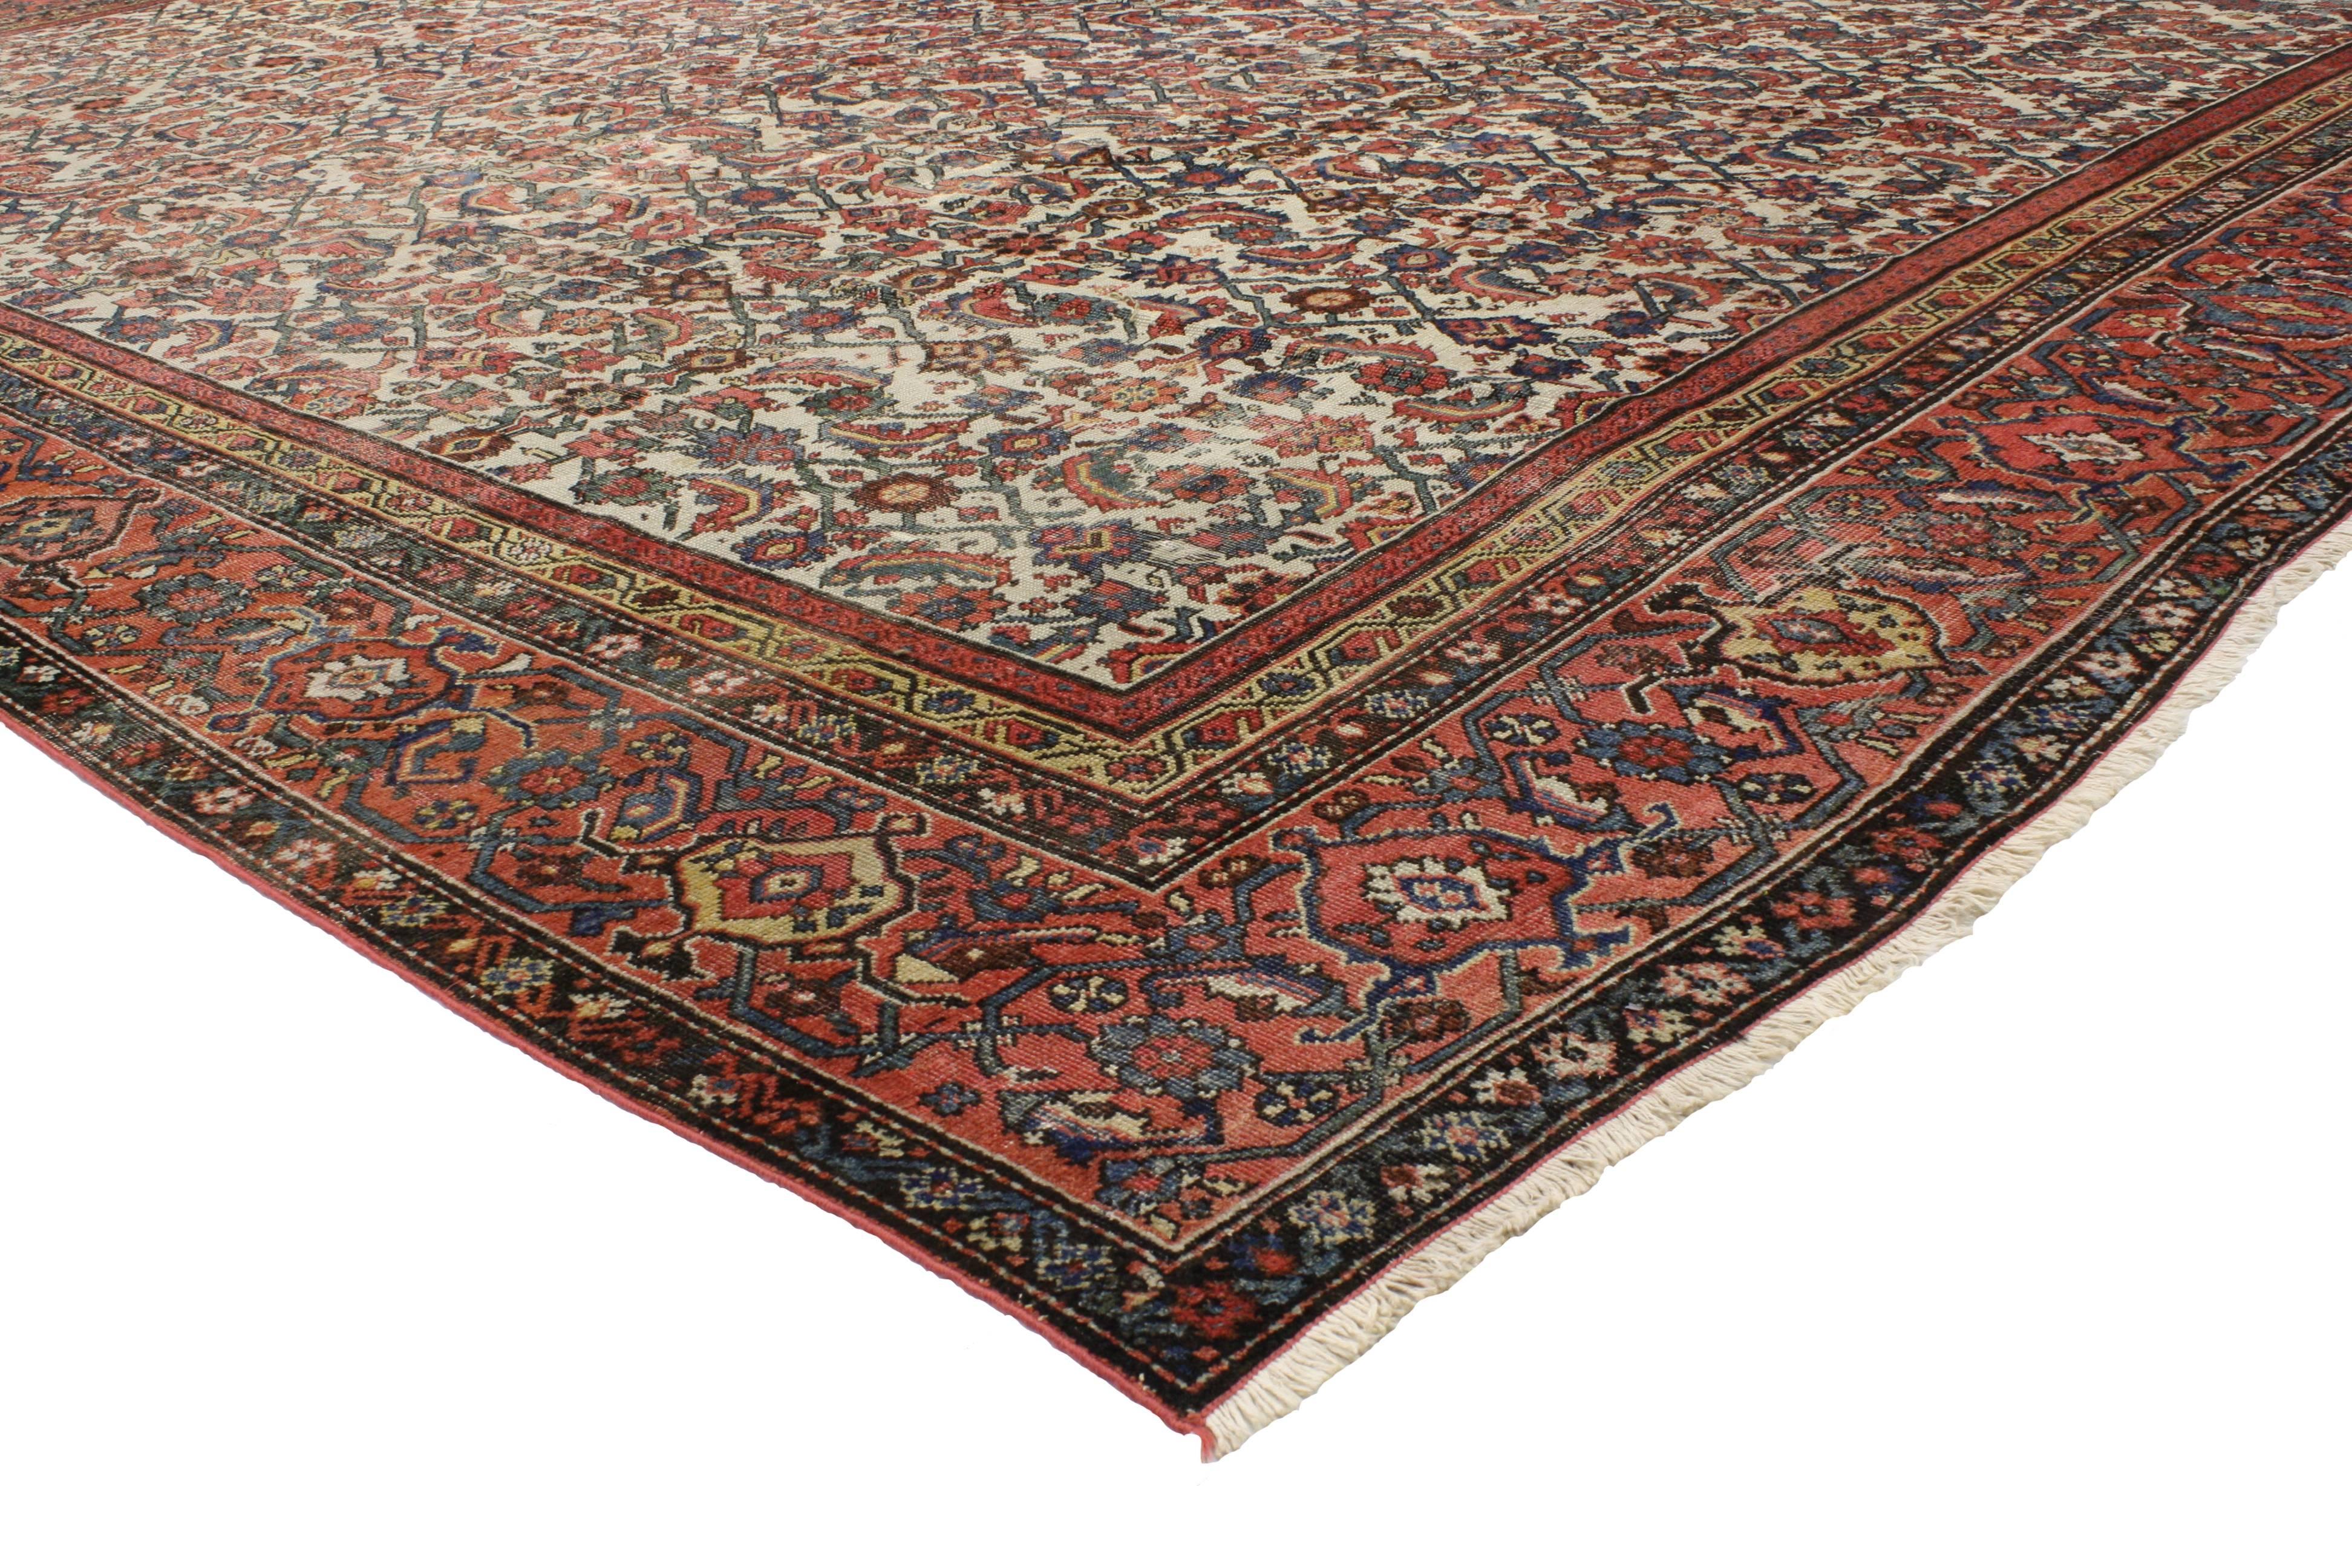 76790 Late 19th Century Distressed Antique Persian Mahal Rug with Rustic English Traditional Style 13'08 x 15'09. With timeless elegance and nostalgic charm, this hand knotted wool late 19th century distressed antique Persian Mahal palace rug can